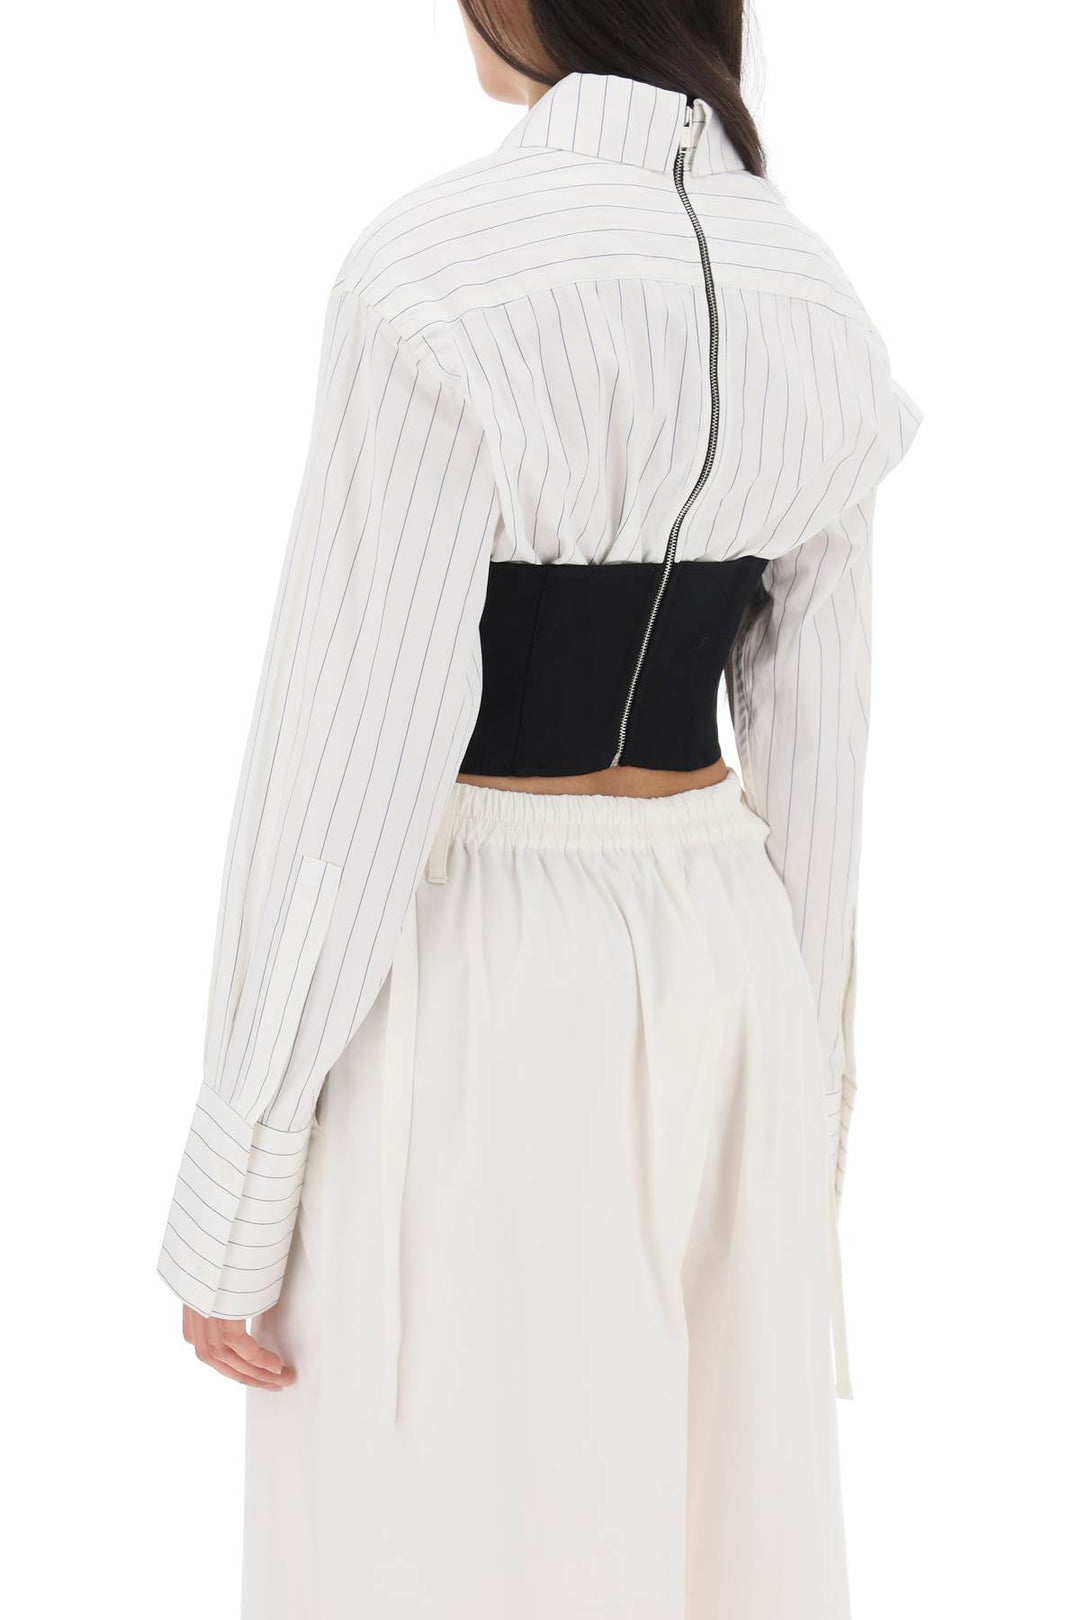 Dion Lee Cropped Shirt With Underbust Corset   Bianco